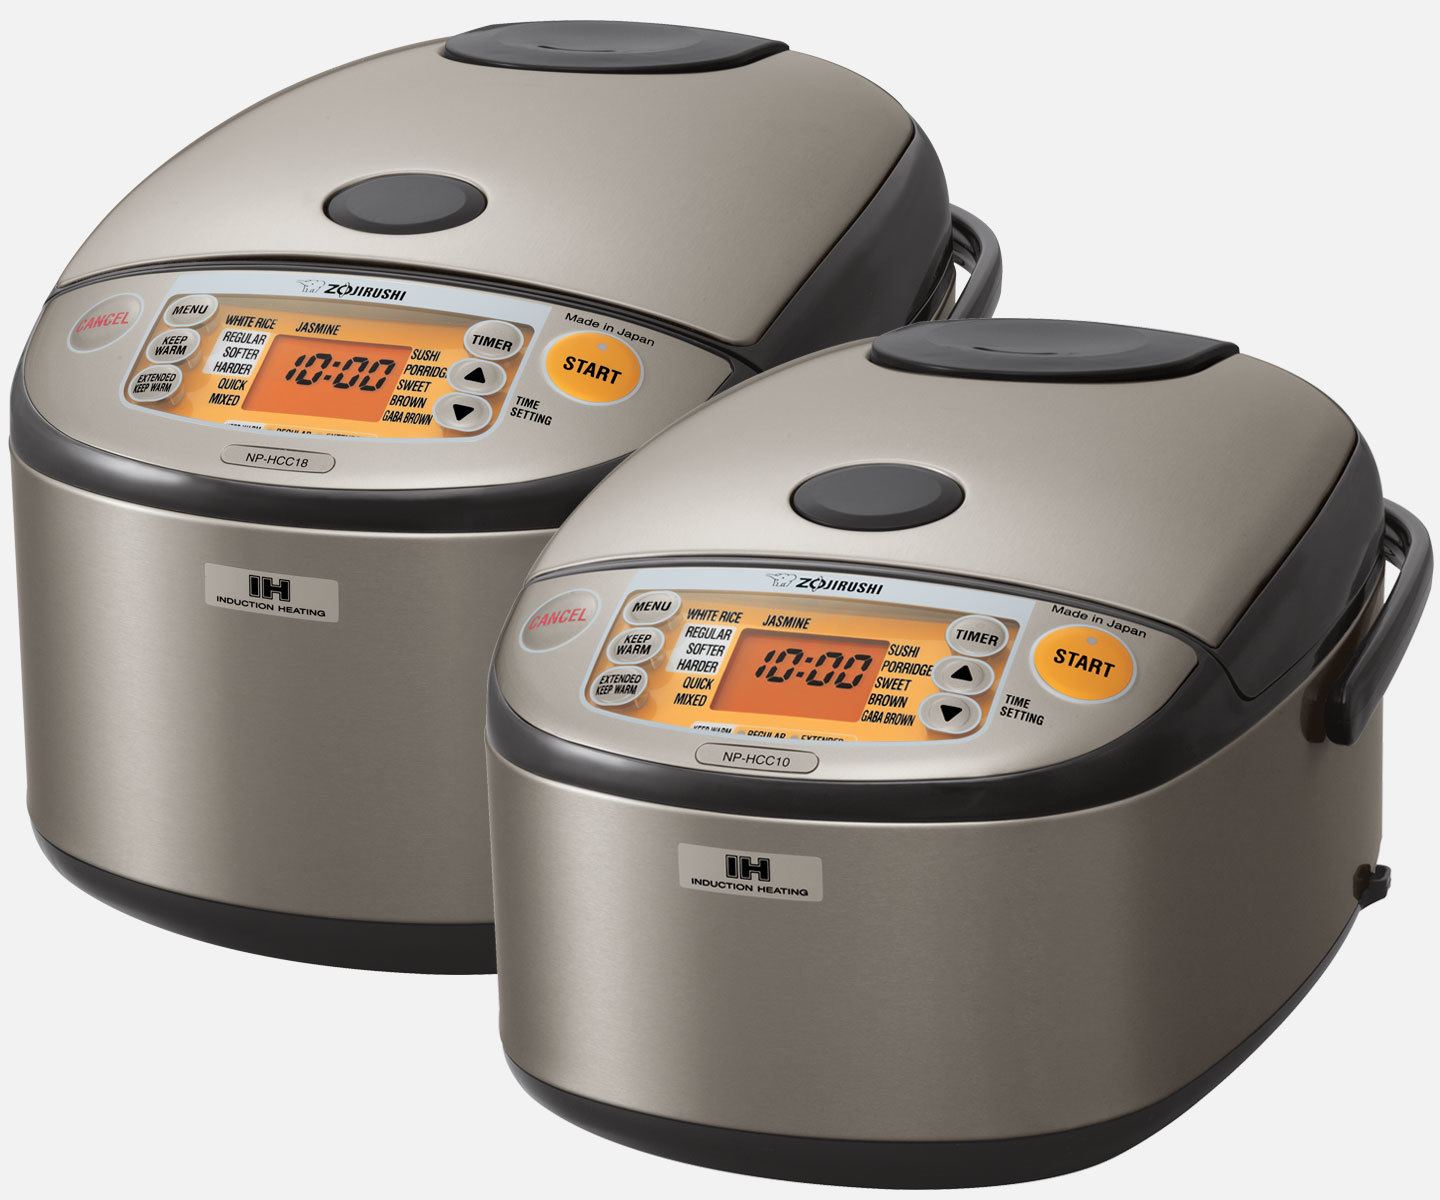 Top 5 Best Rice Cookers [2021 Update] - ConsumerHelp Guide